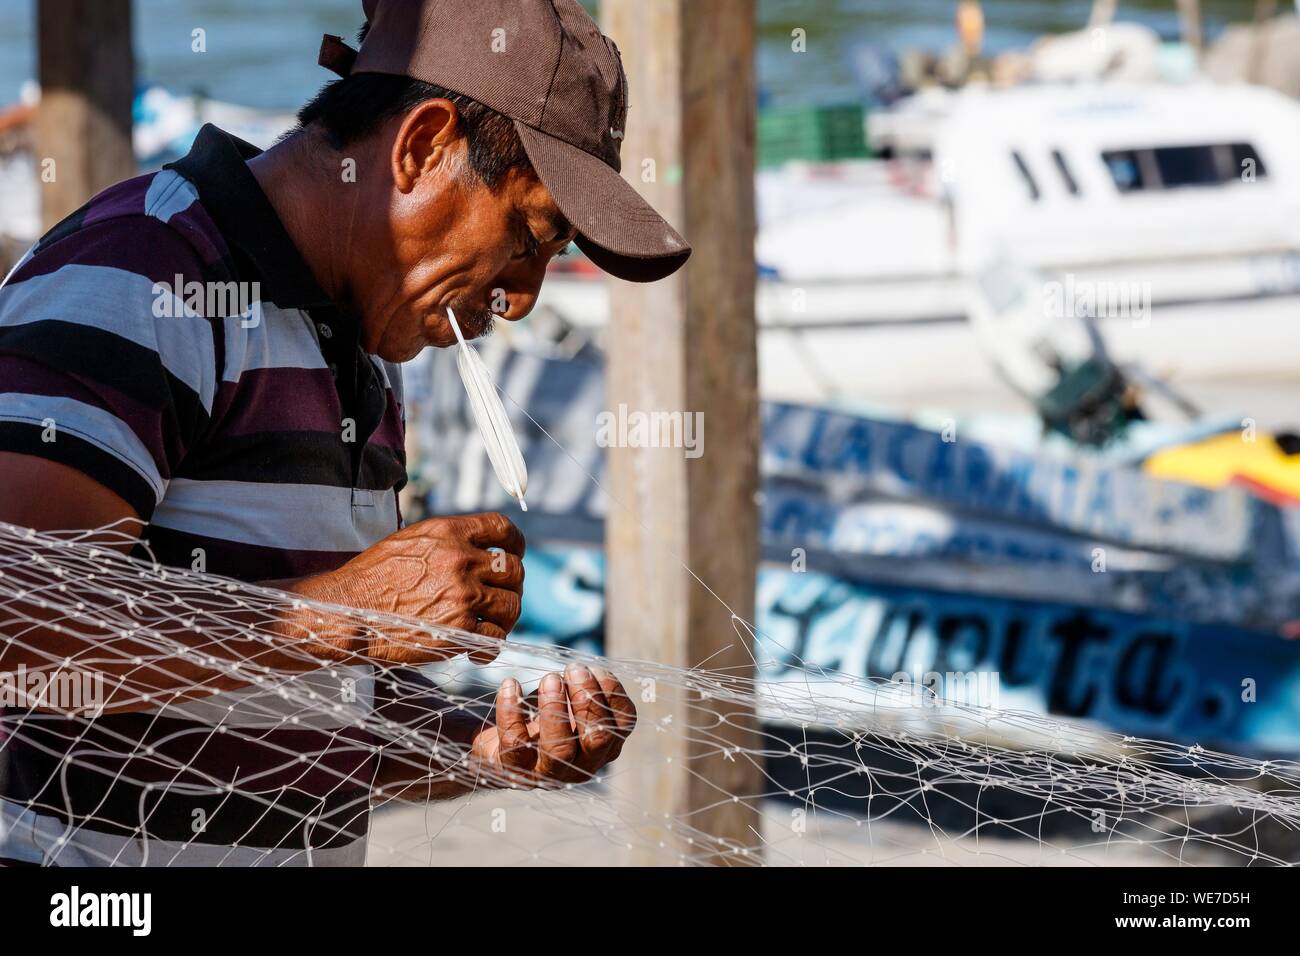 Mexico, Campeche state, Campeche, fisherman fixing a net Stock Photo